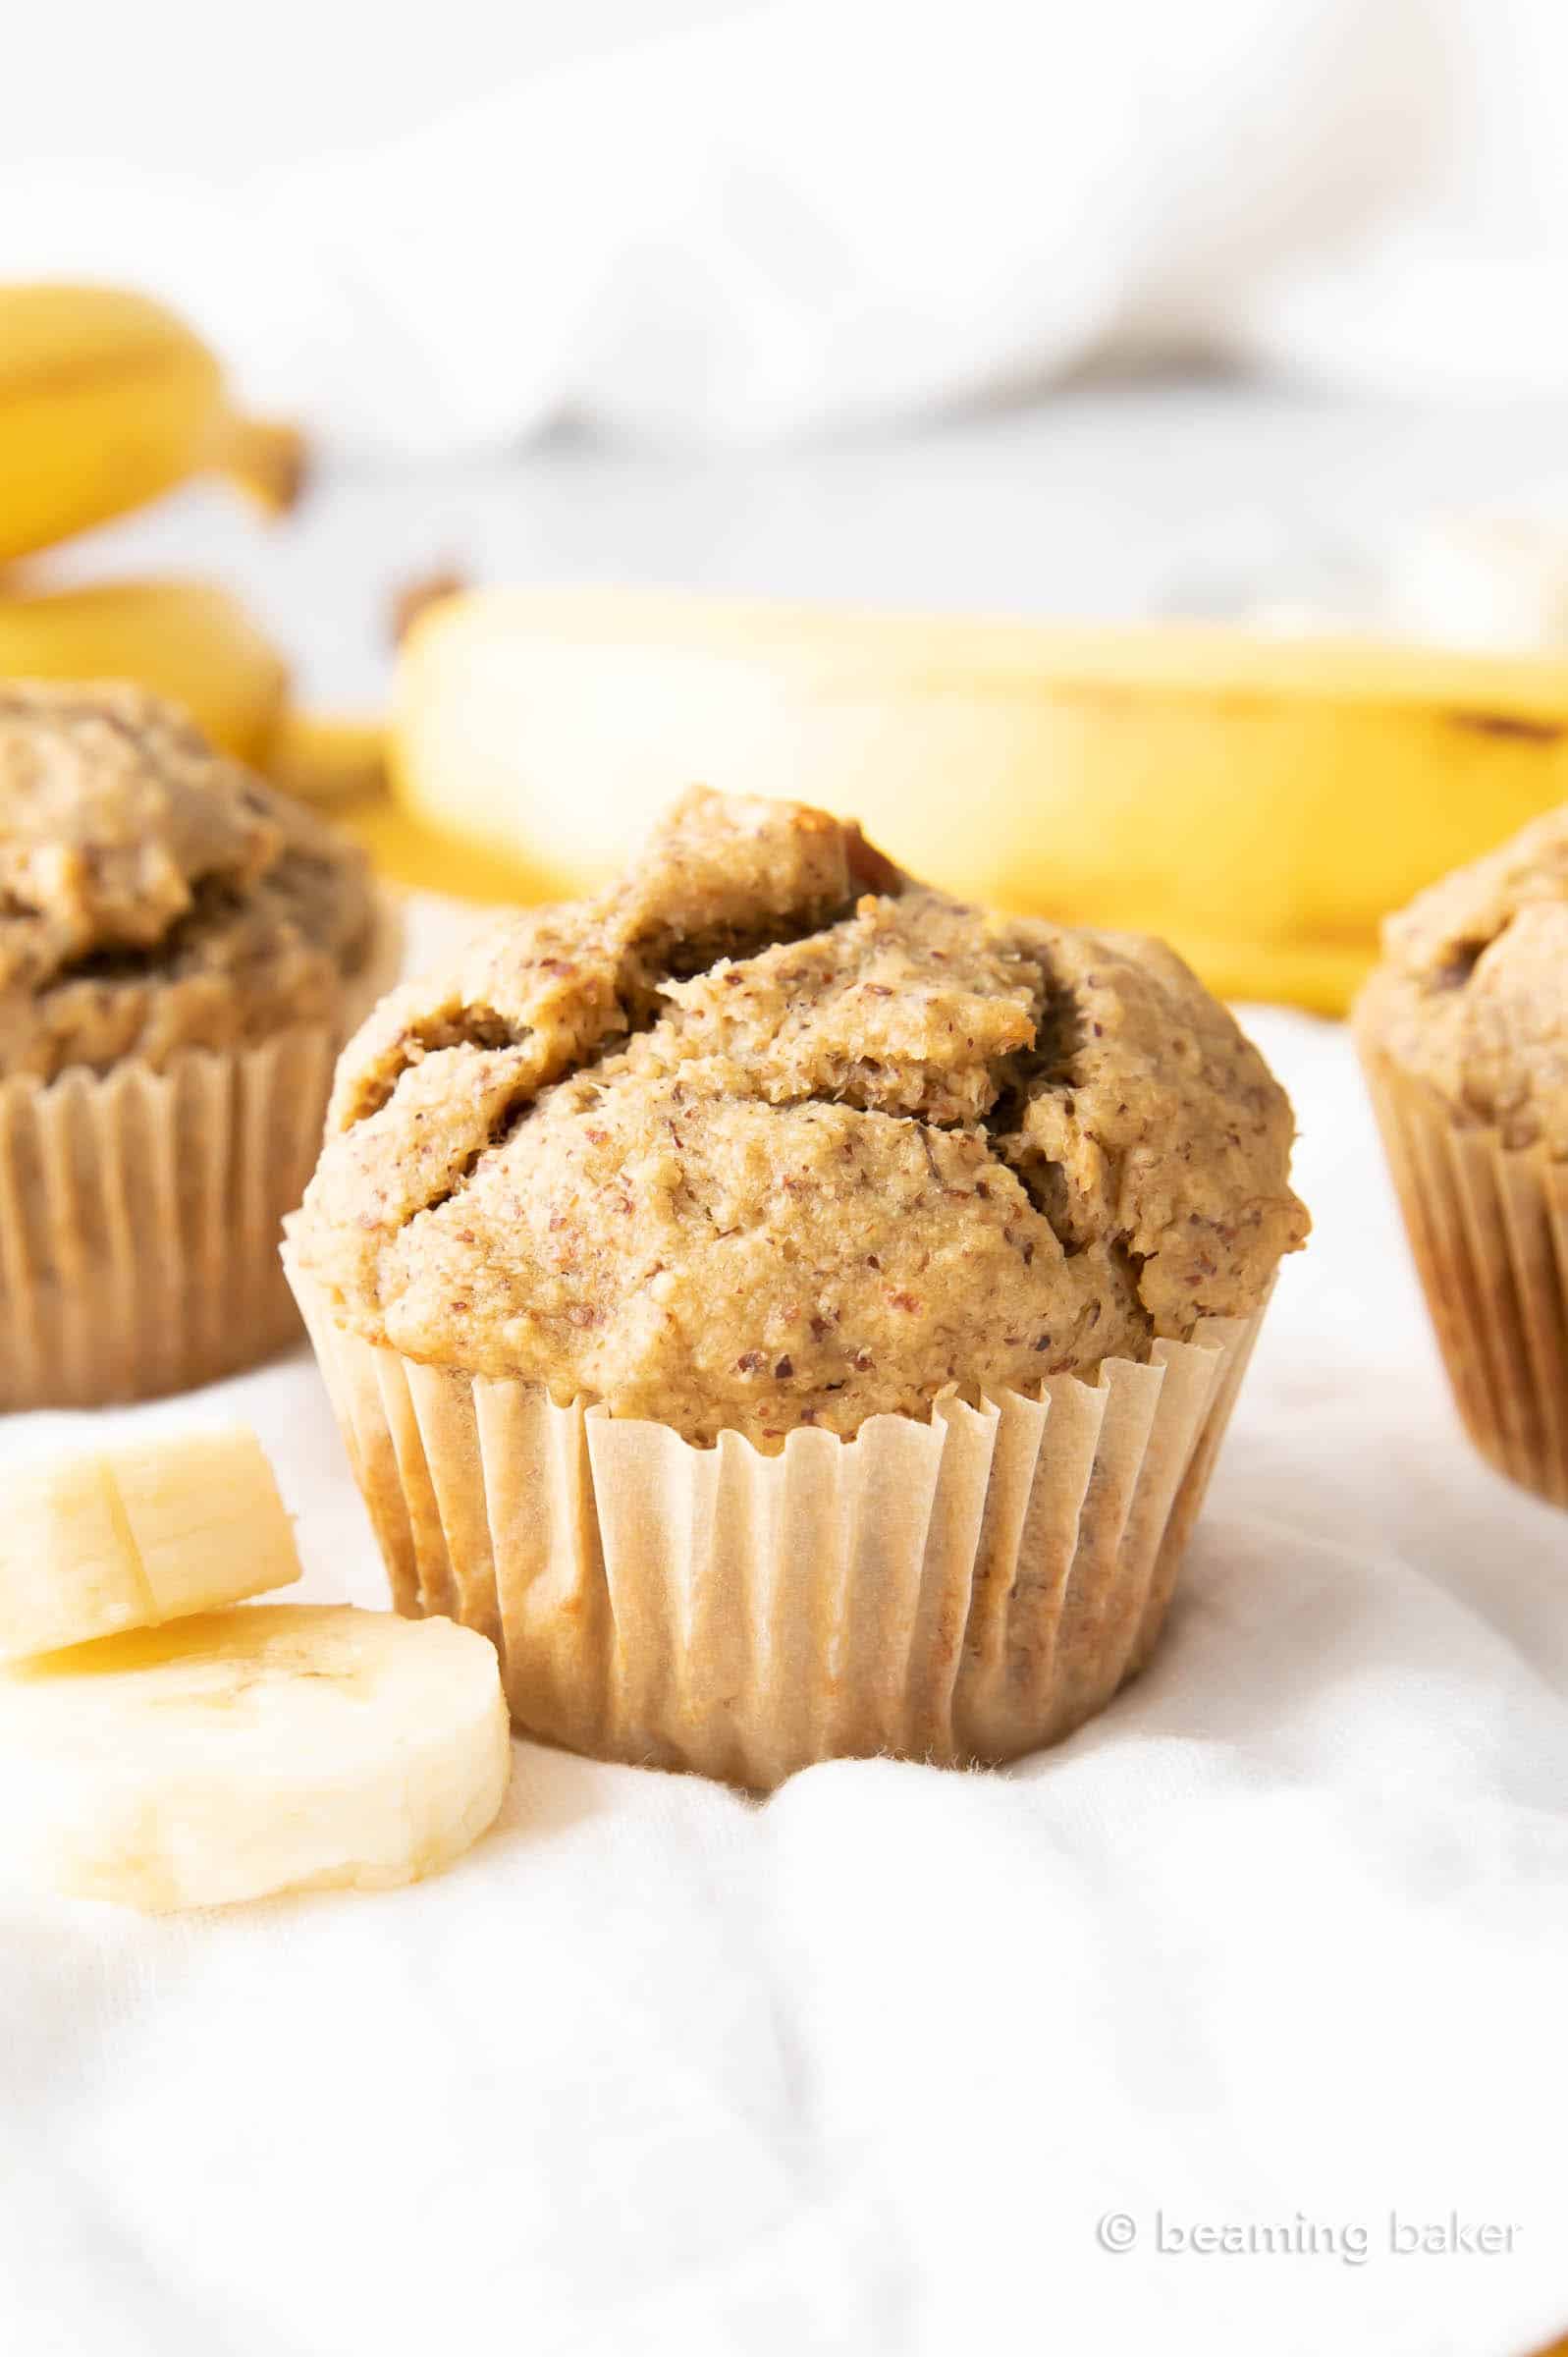 25+ Absolute Best Vegan Muffins: an irresistibly mouthwatering collection of the best vegan muffins! Including vegan banana muffins, vegan pumpkin muffins, vegan chocolate chip muffins, and more! #veganmuffins #veganbananamuffins #vegan #muffins | Recipes on BeamingBaker.com